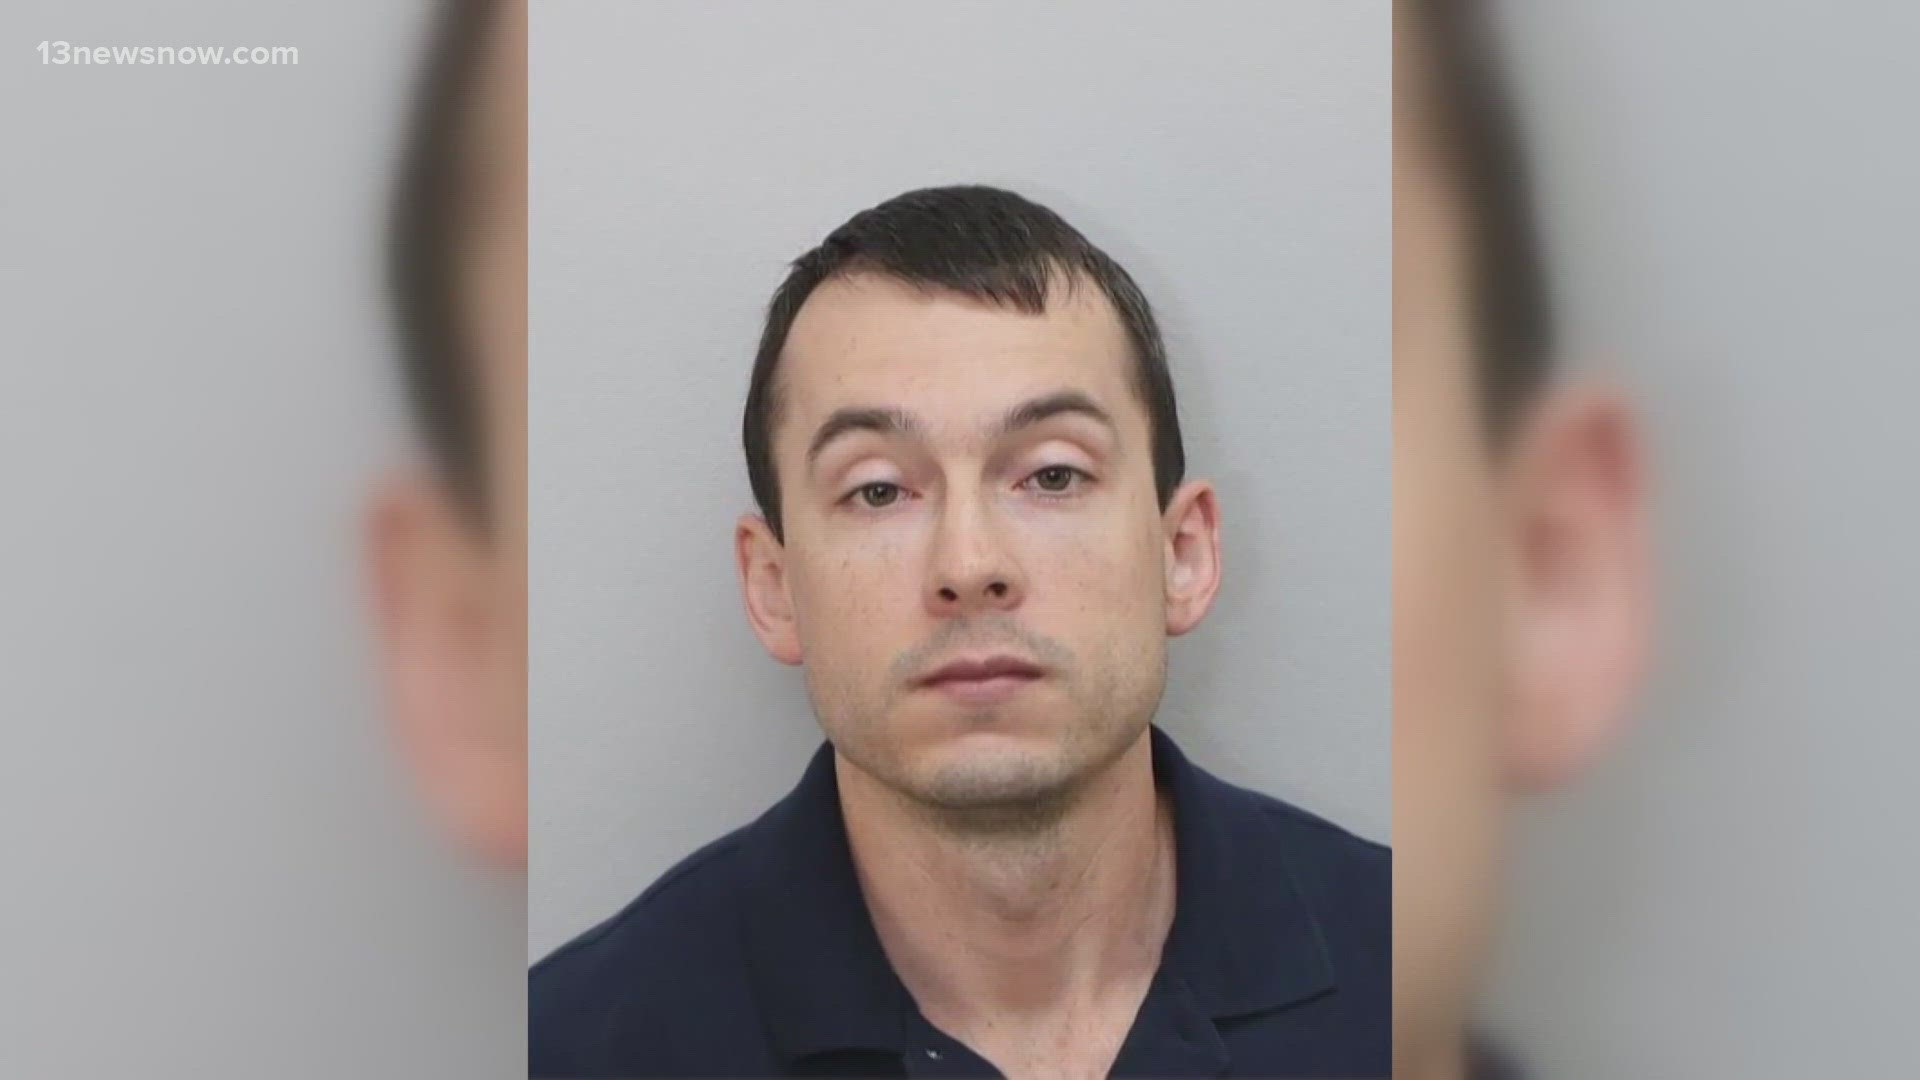 Xxx Video Dh School Com - Man facing child porn charges in Virginia Beach appears in court |  13newsnow.com